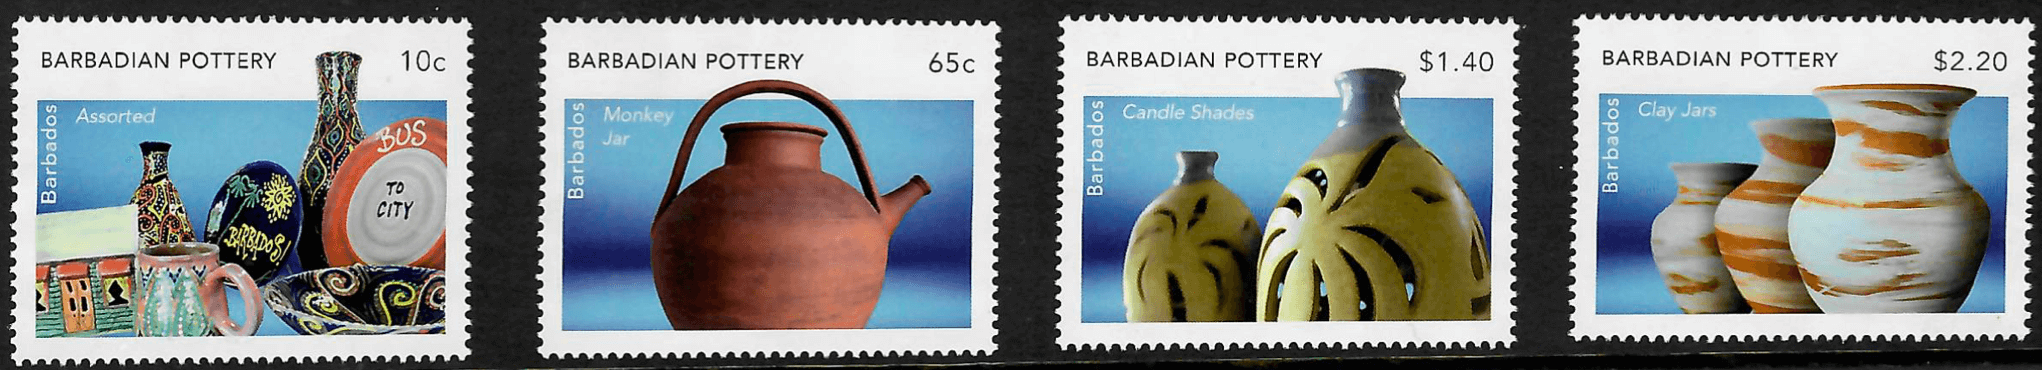 Barbadian Pottery Stamps